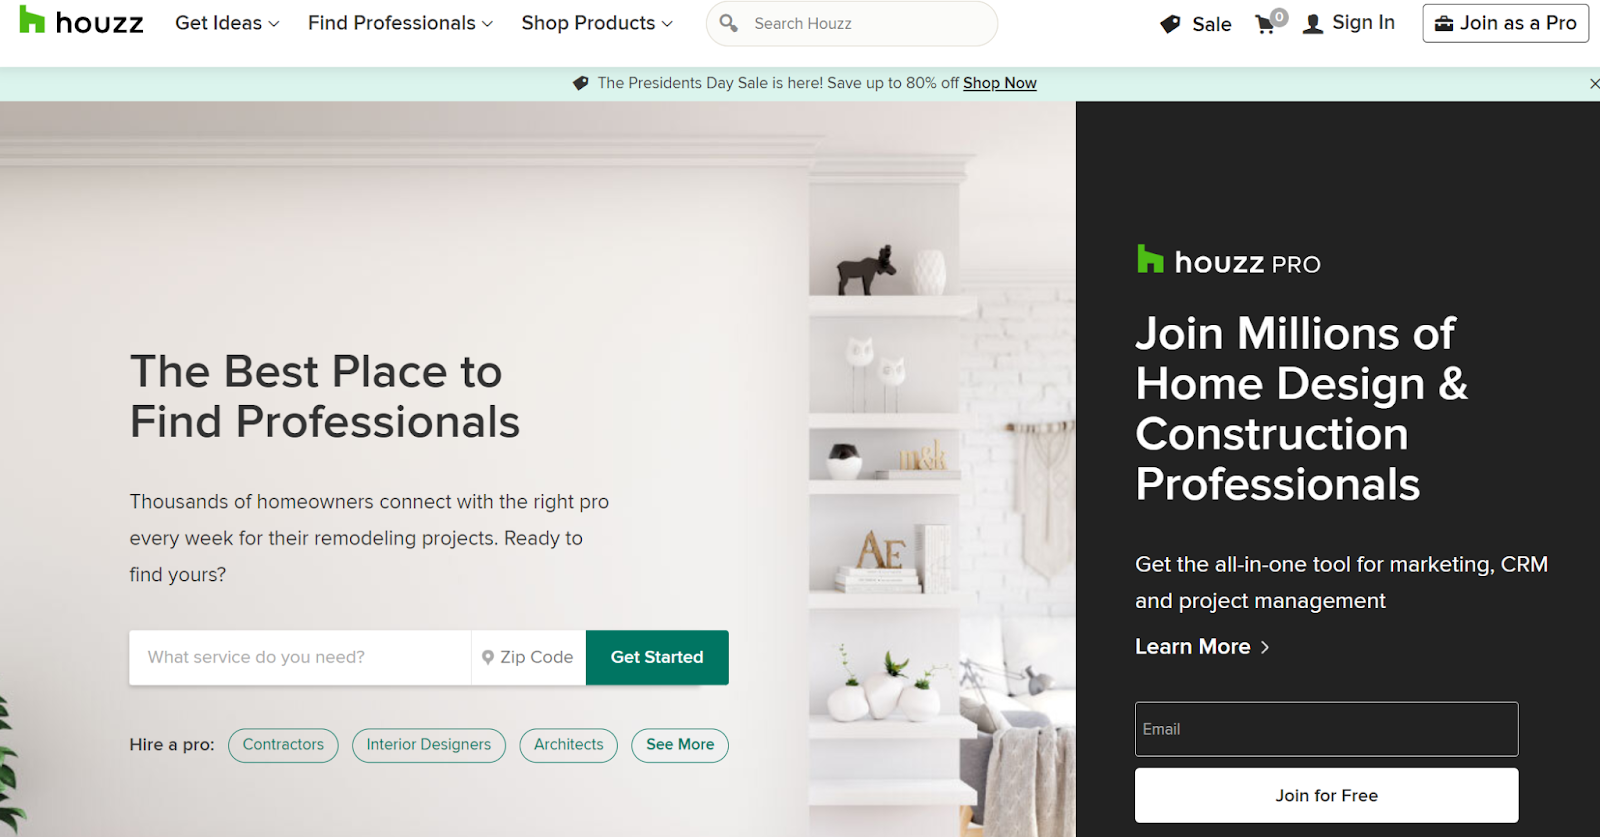 Houzz website home page